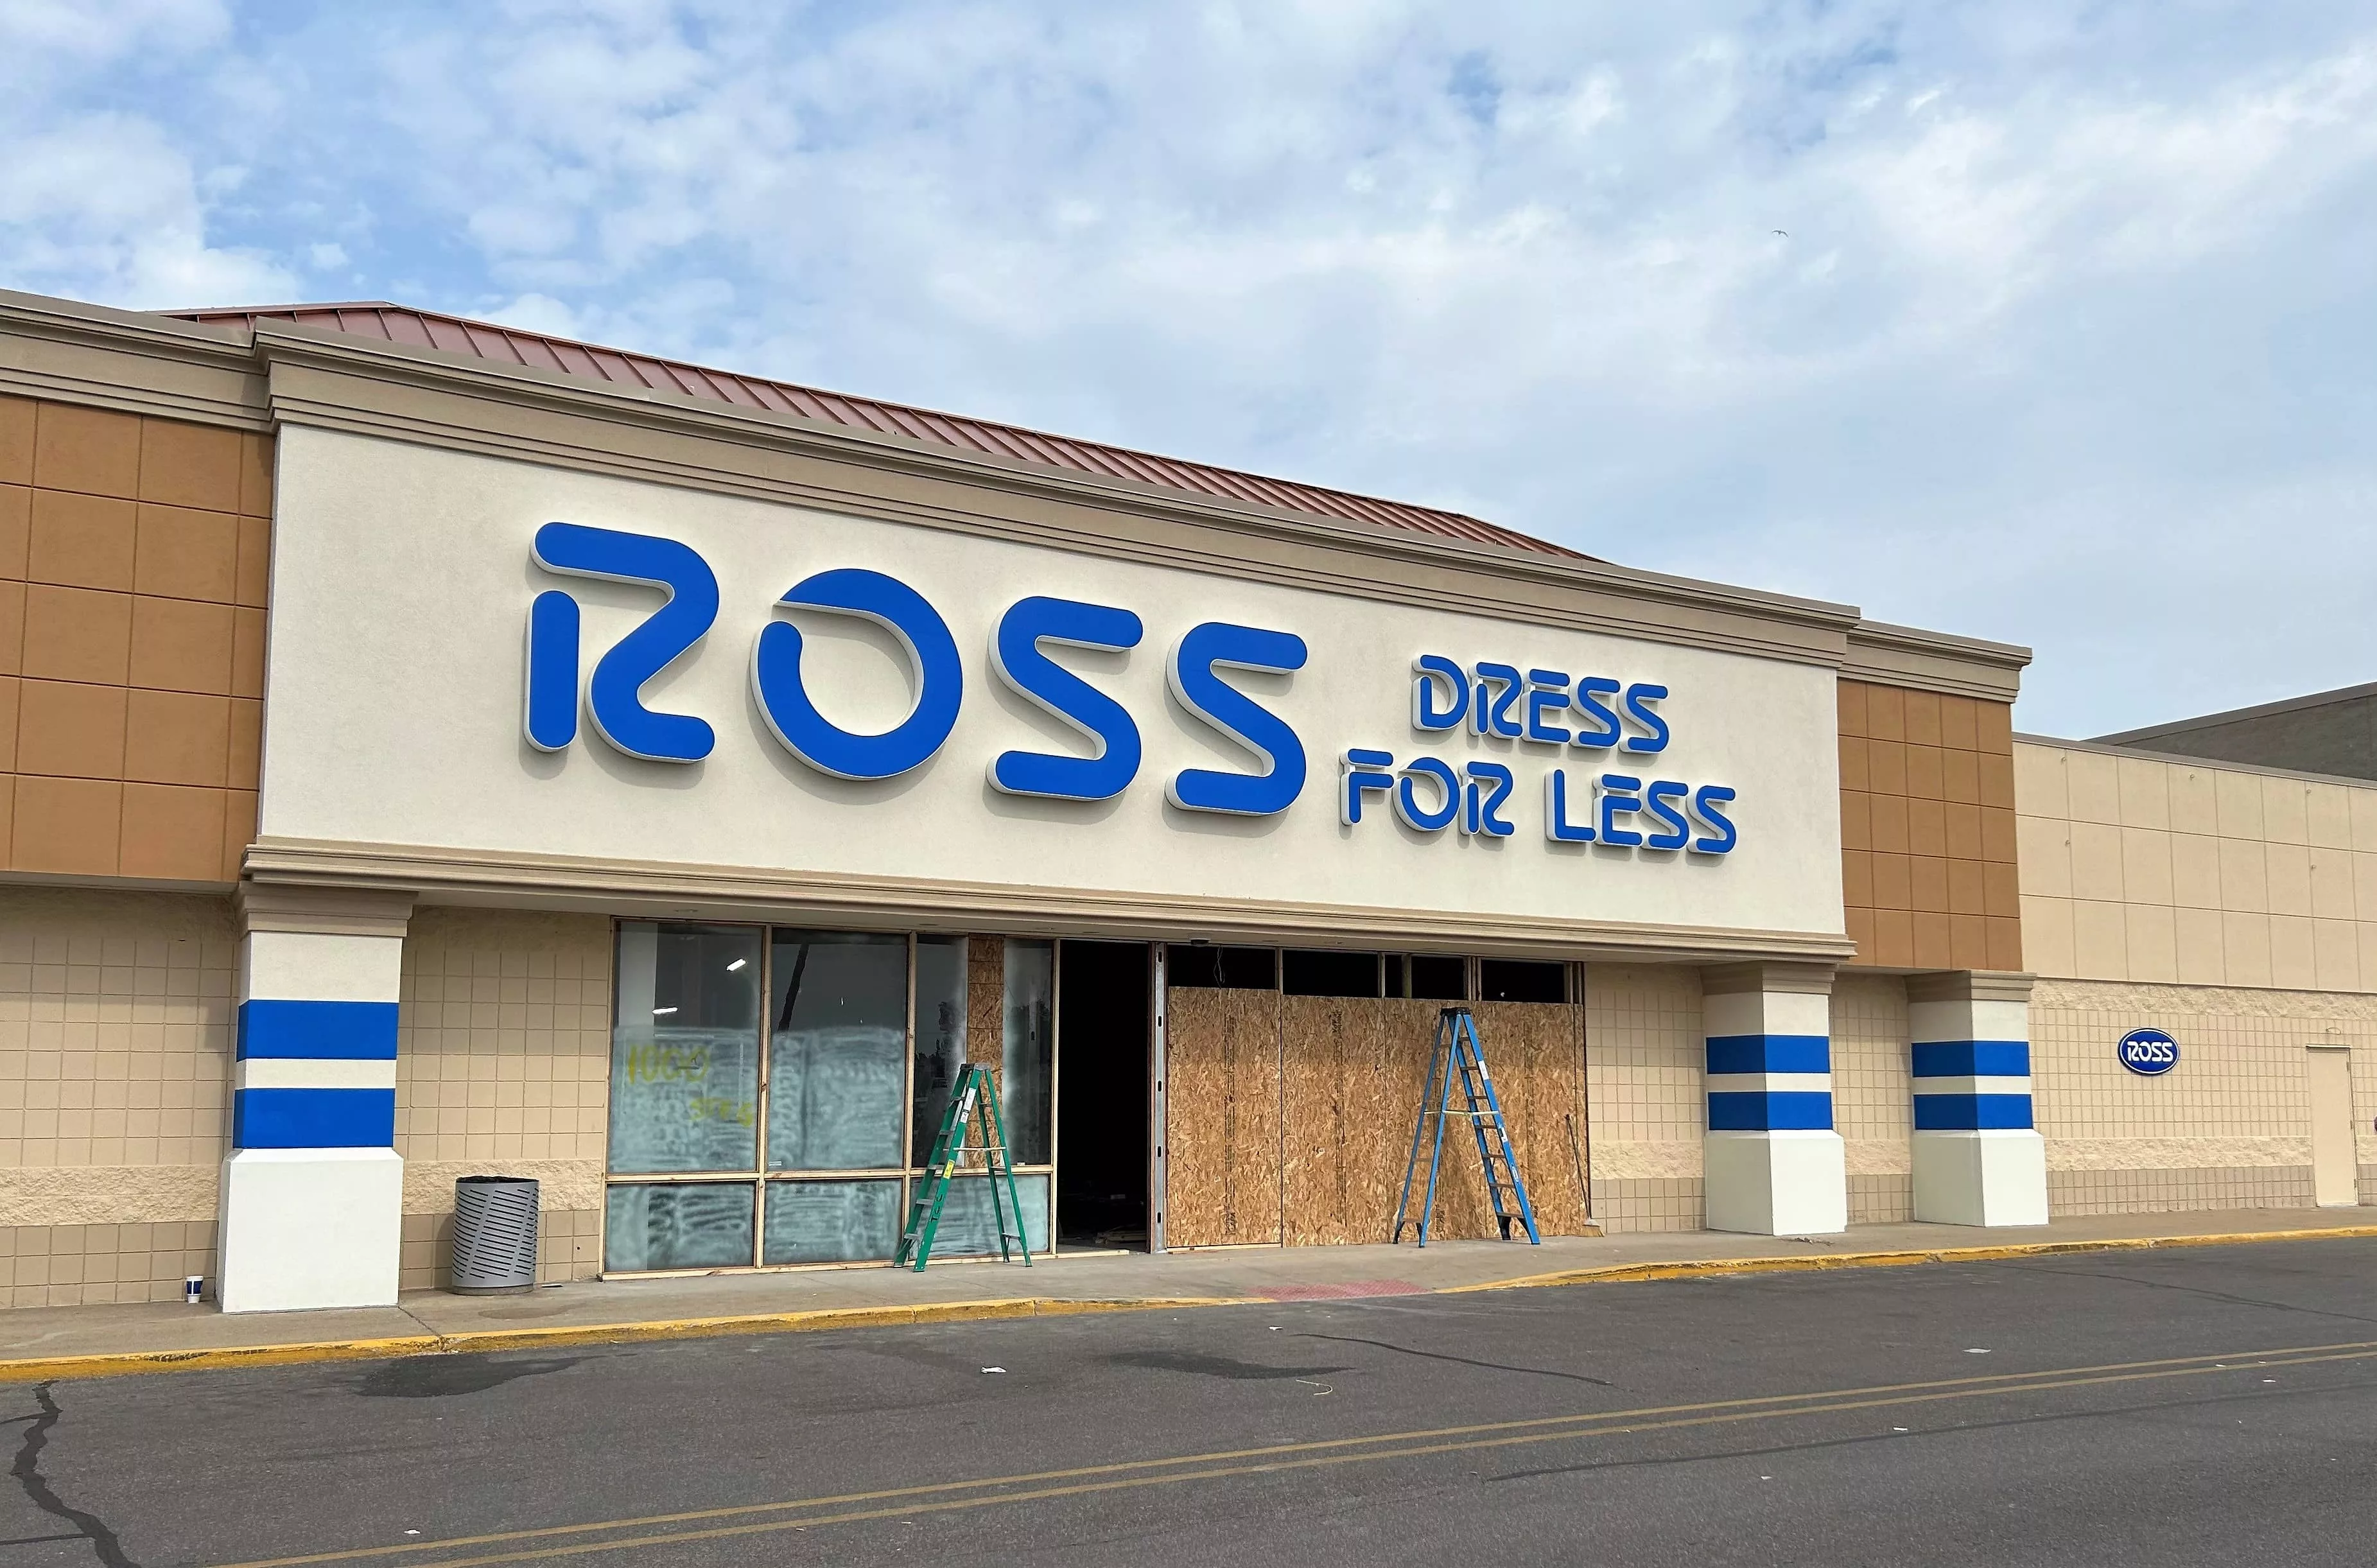 Ross Dress For Less in Benton Harbor still at least a month from